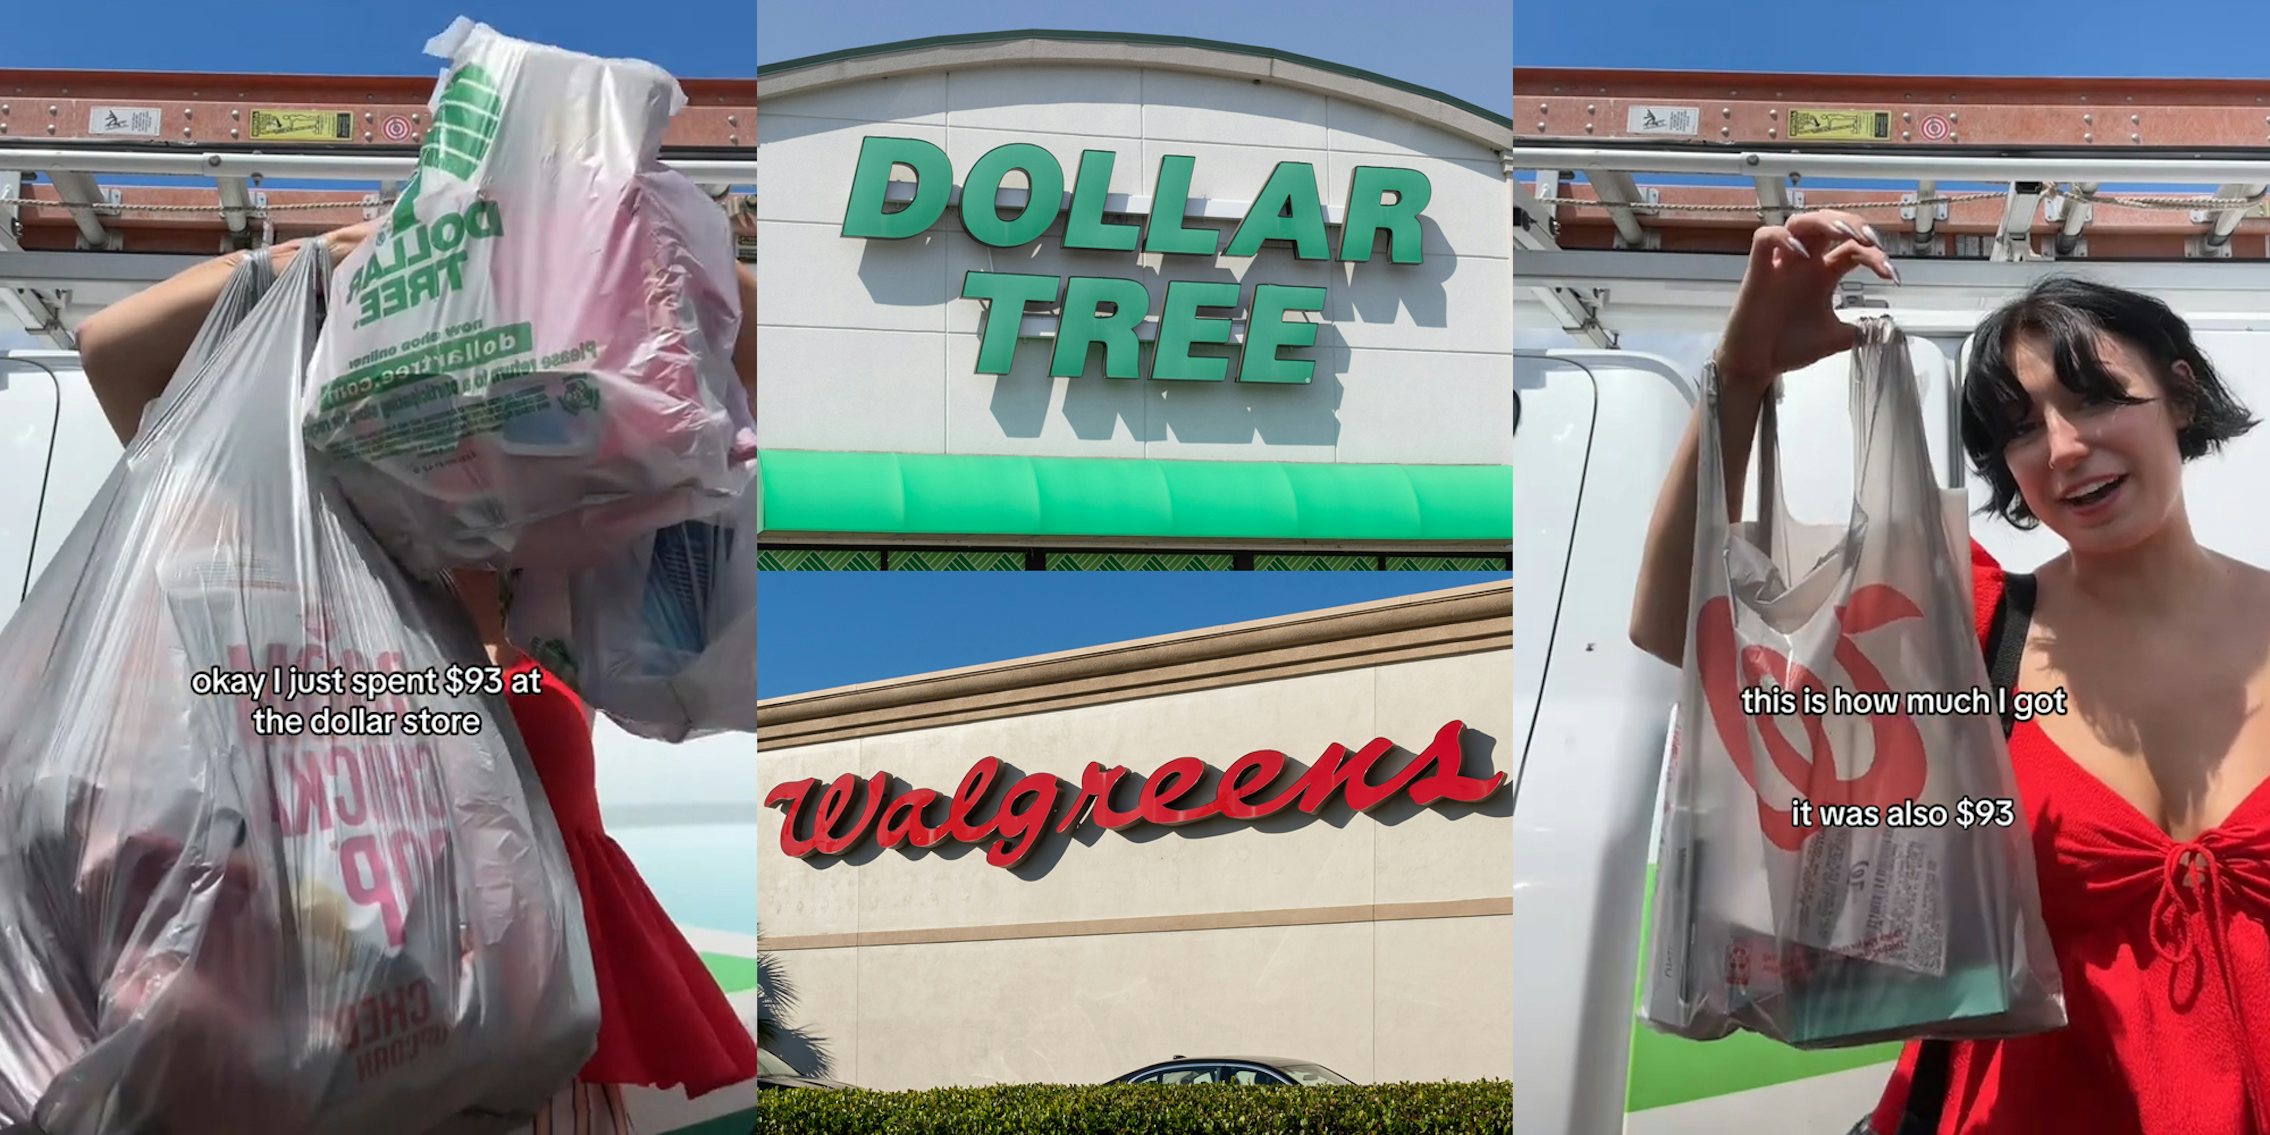 shopper with Dollar Tree bags with caption 'Okay I just spent $93 at the dollar store' (l) Dollar Tre sign above Walgreens sign (c) shopper with Walgreens bag with caption 'this is how much I got it was also $93' (r)